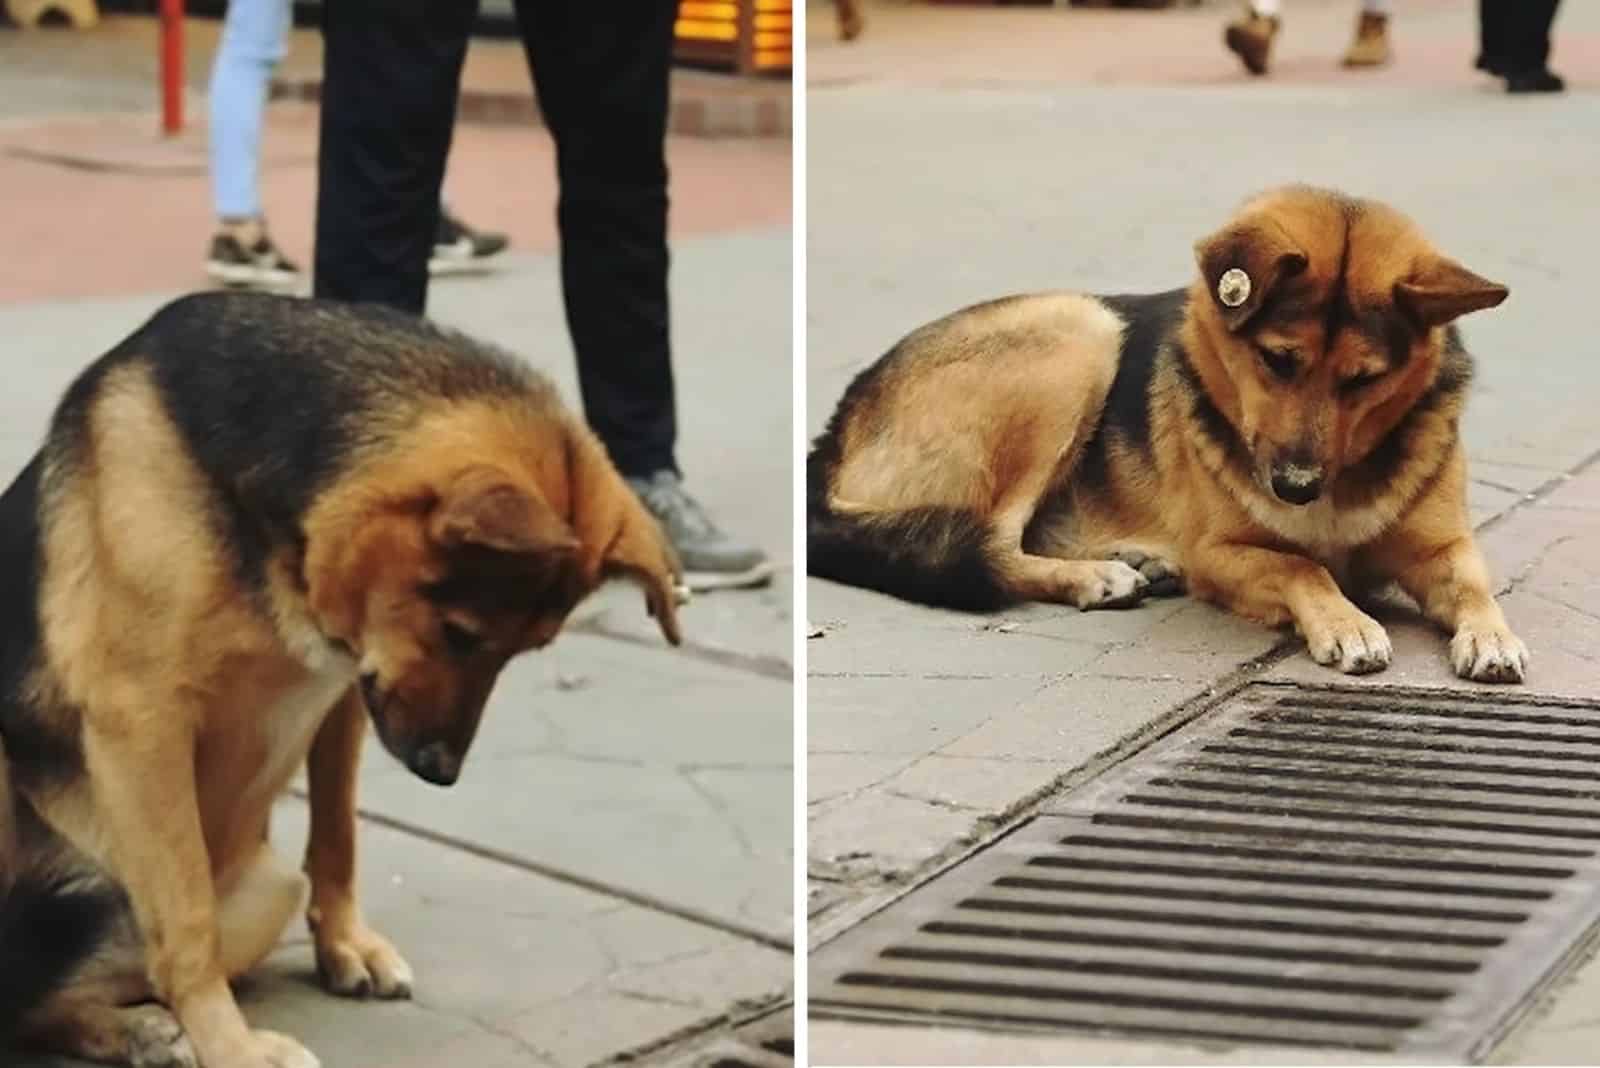 the dog sits and looks into the drain